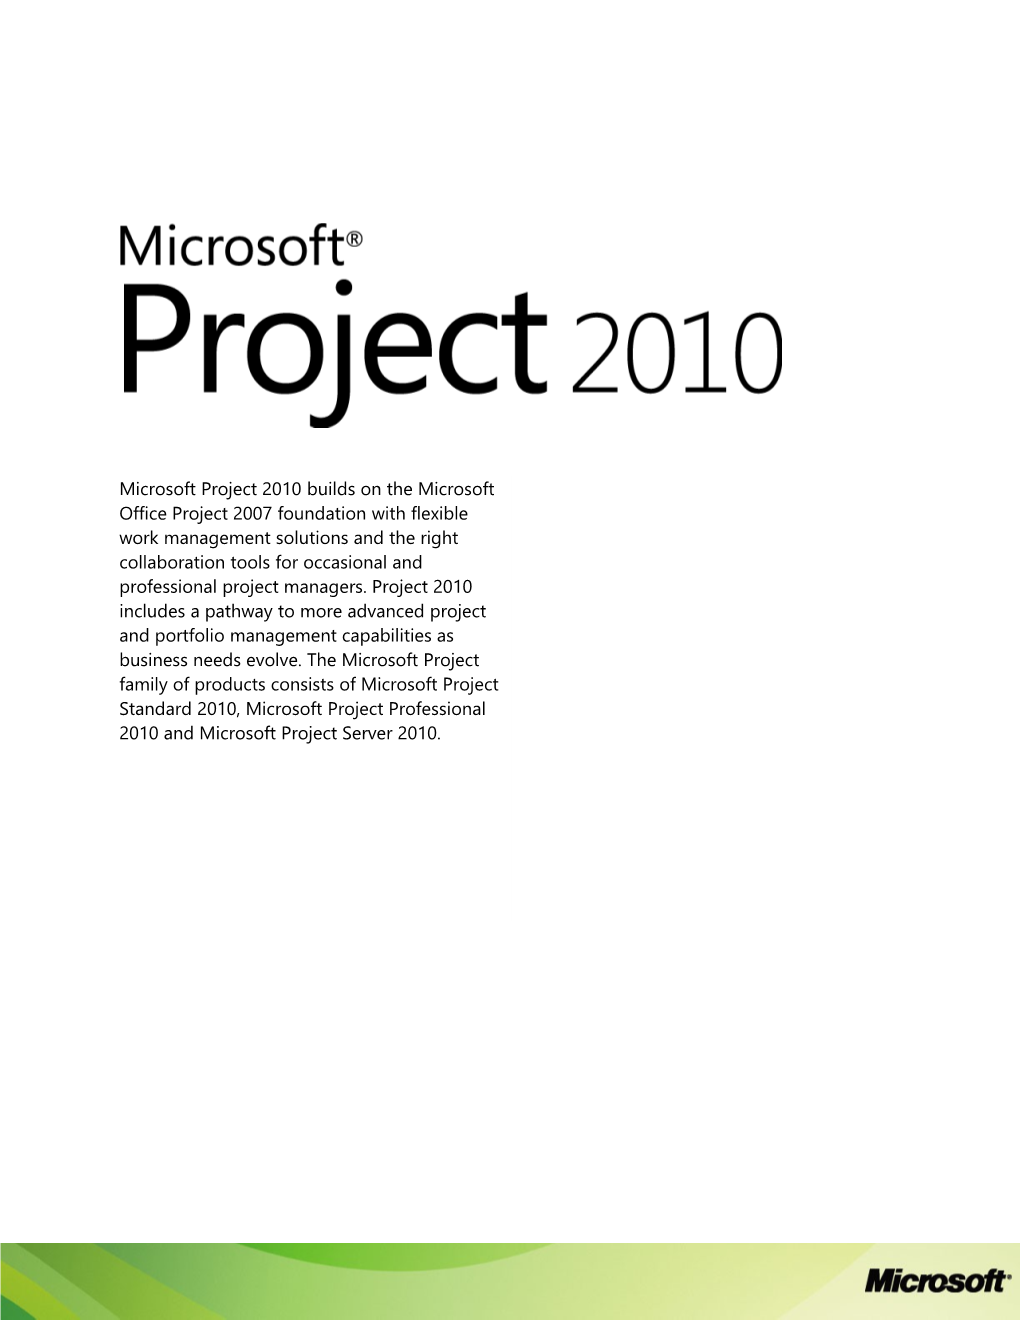 Microsoft Project 2010 - What's New